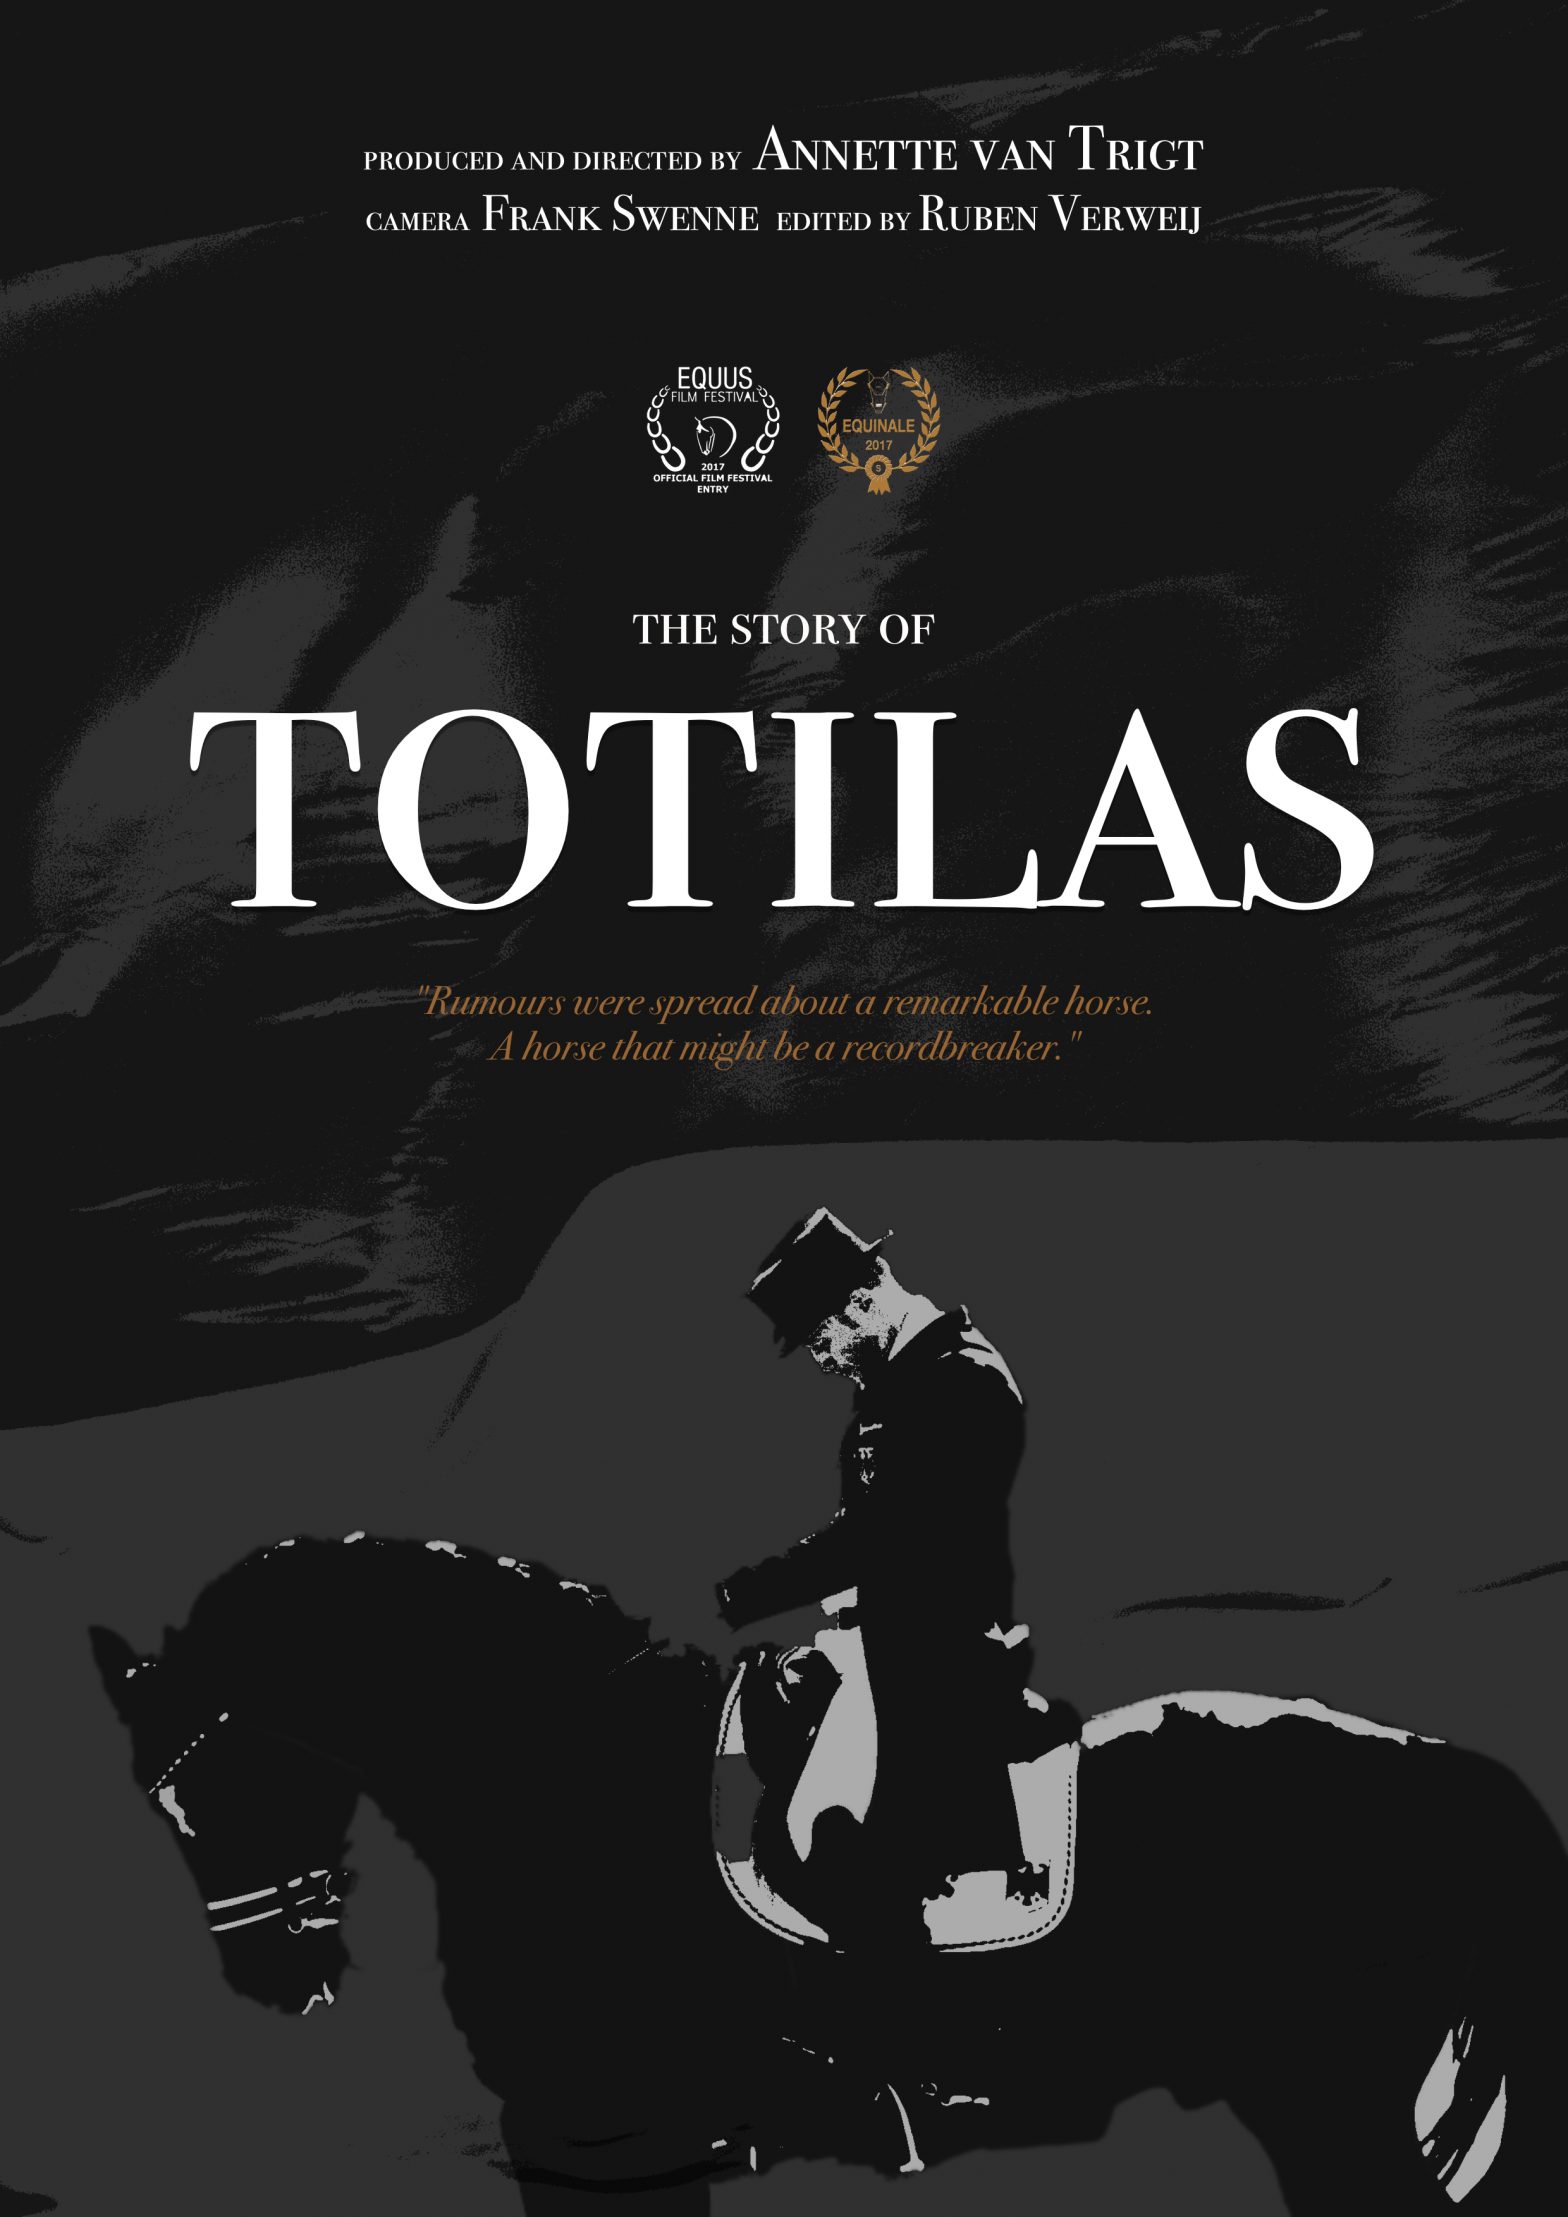 The Story of Totilas